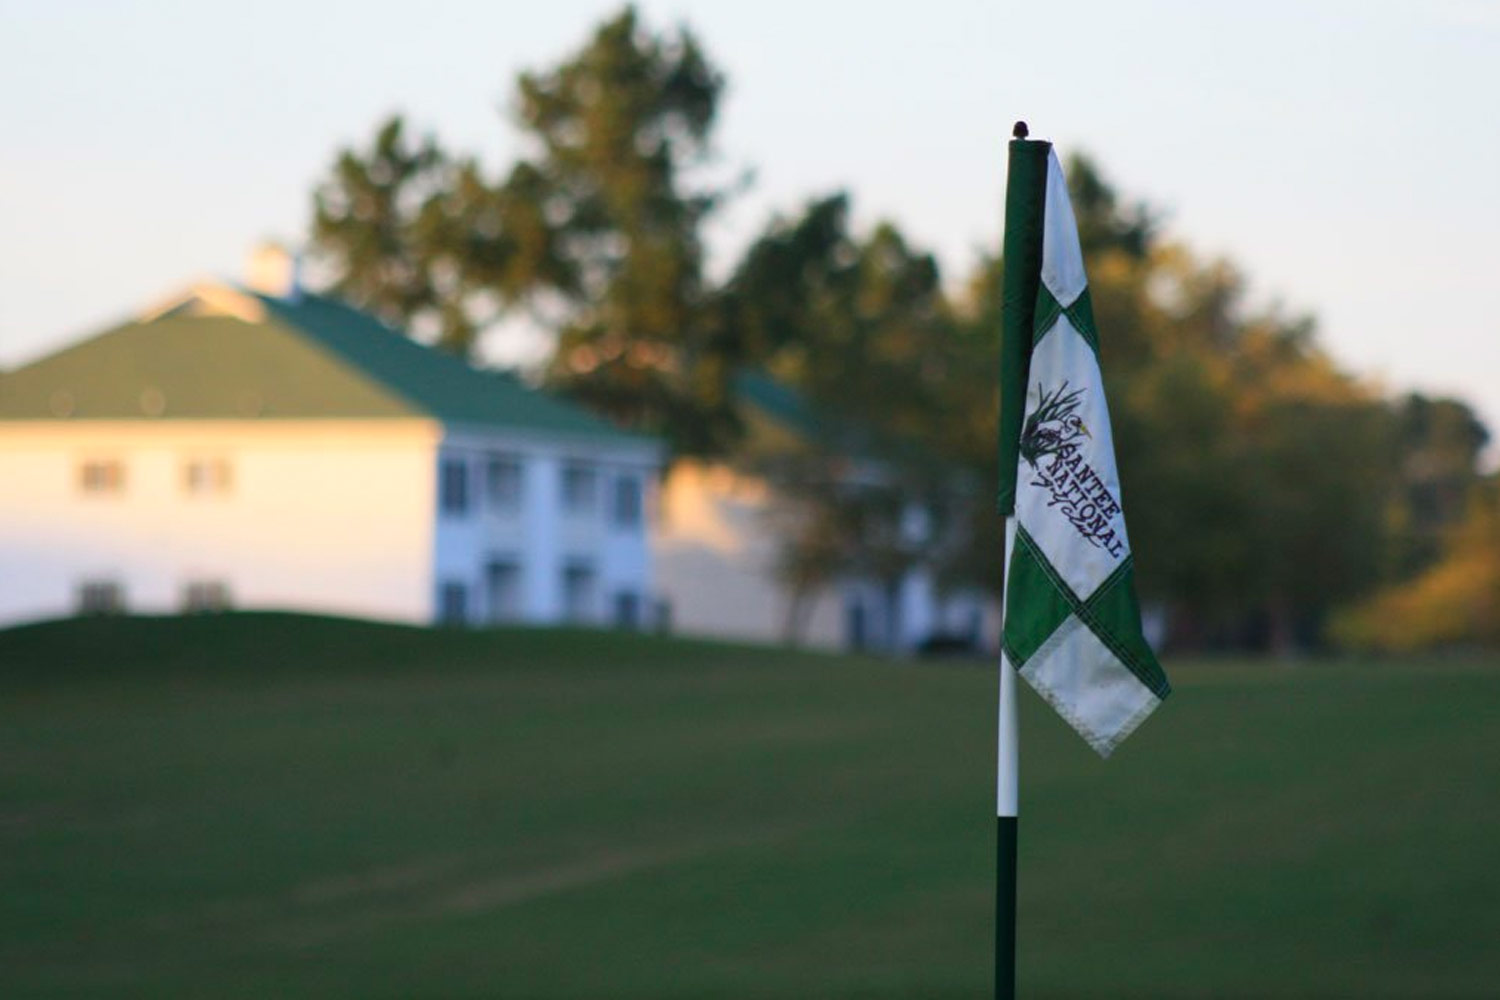 golf tee flag in foreground with villas in background